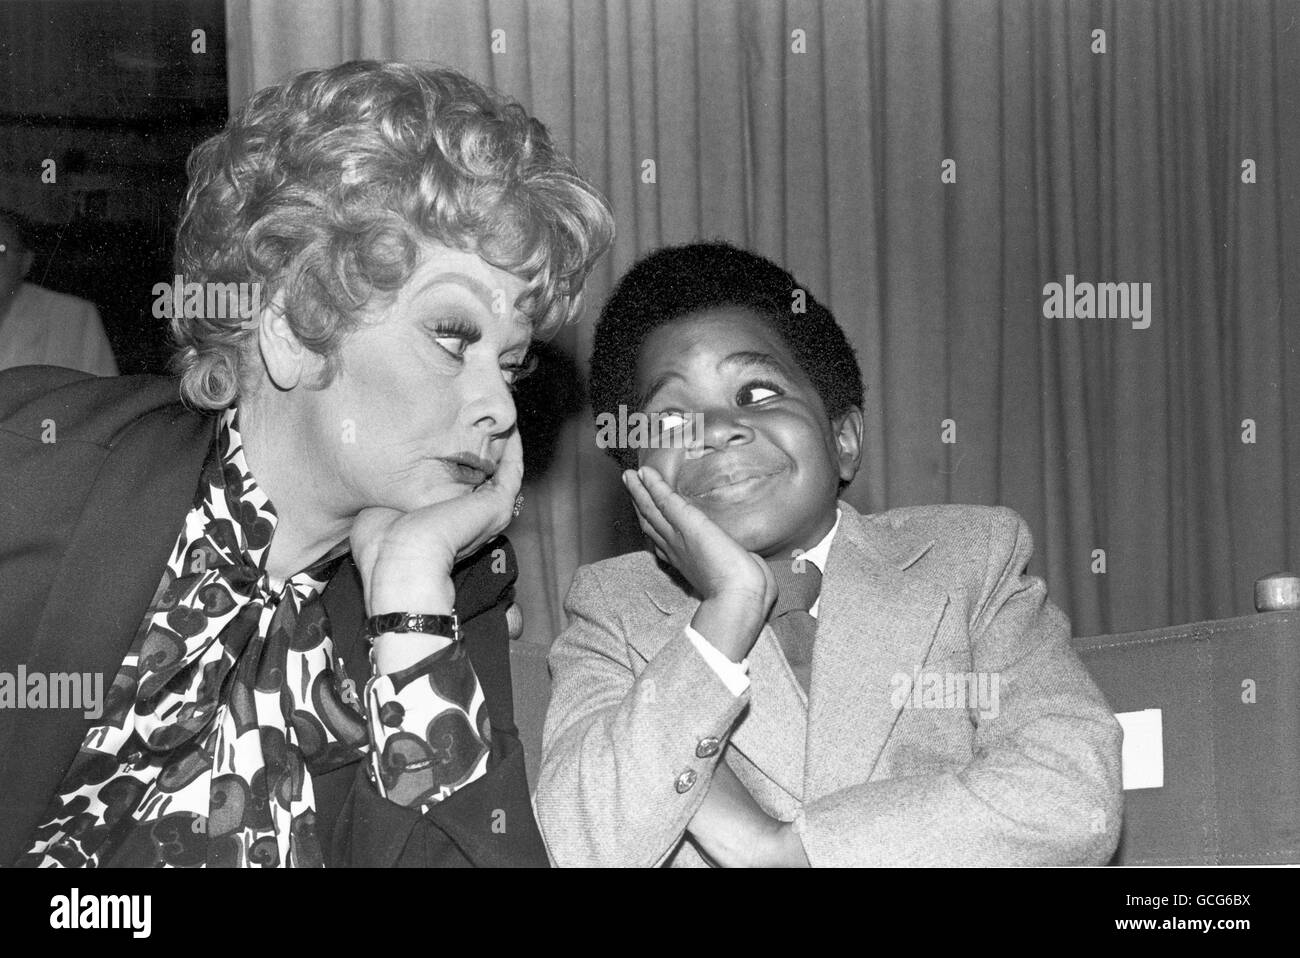 Different Strokes actor Gary Coleman dies at the age of 42 on 28/05/10 after being rushed to hospital and suffering from an intracranial hemorrhage. Comedian-actress Lucille Ball, left, poses with Gary Coleman during a break in filming 'The Lucille Ball Special' in Hollywood, Ca., on Monday, Nov. 19, 1979. Coleman has a guest spot on the television special. Stock Photo